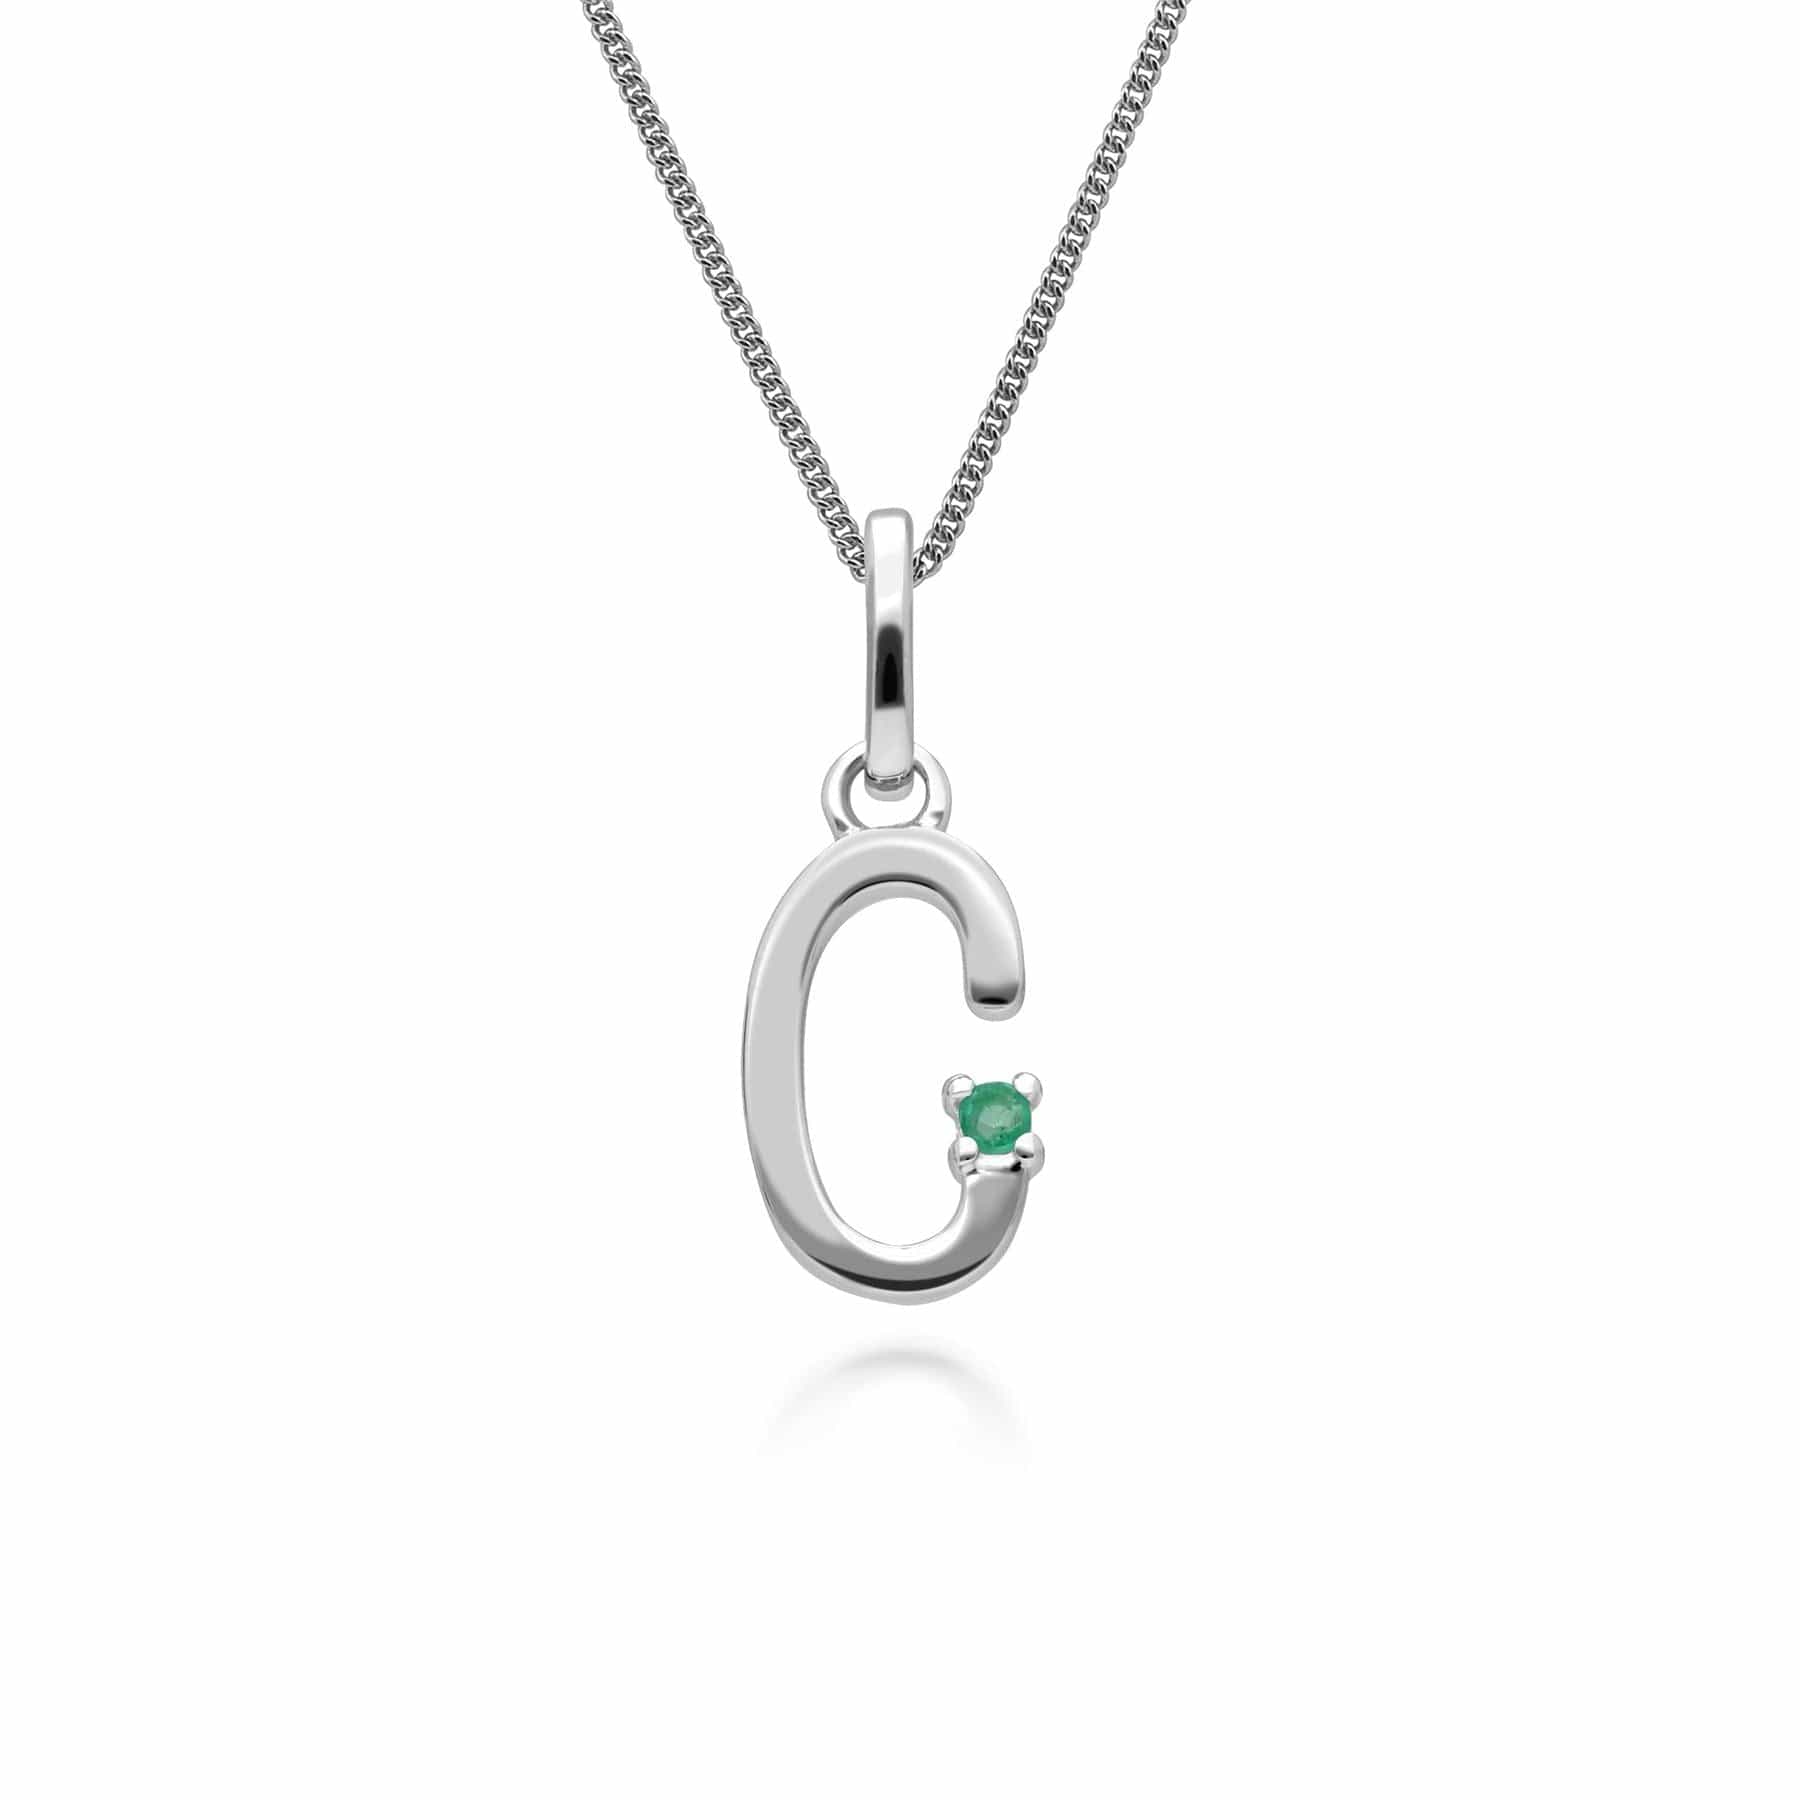 Initial Emerald Letter Charm Necklace in 9ct White Gold - Gemondo